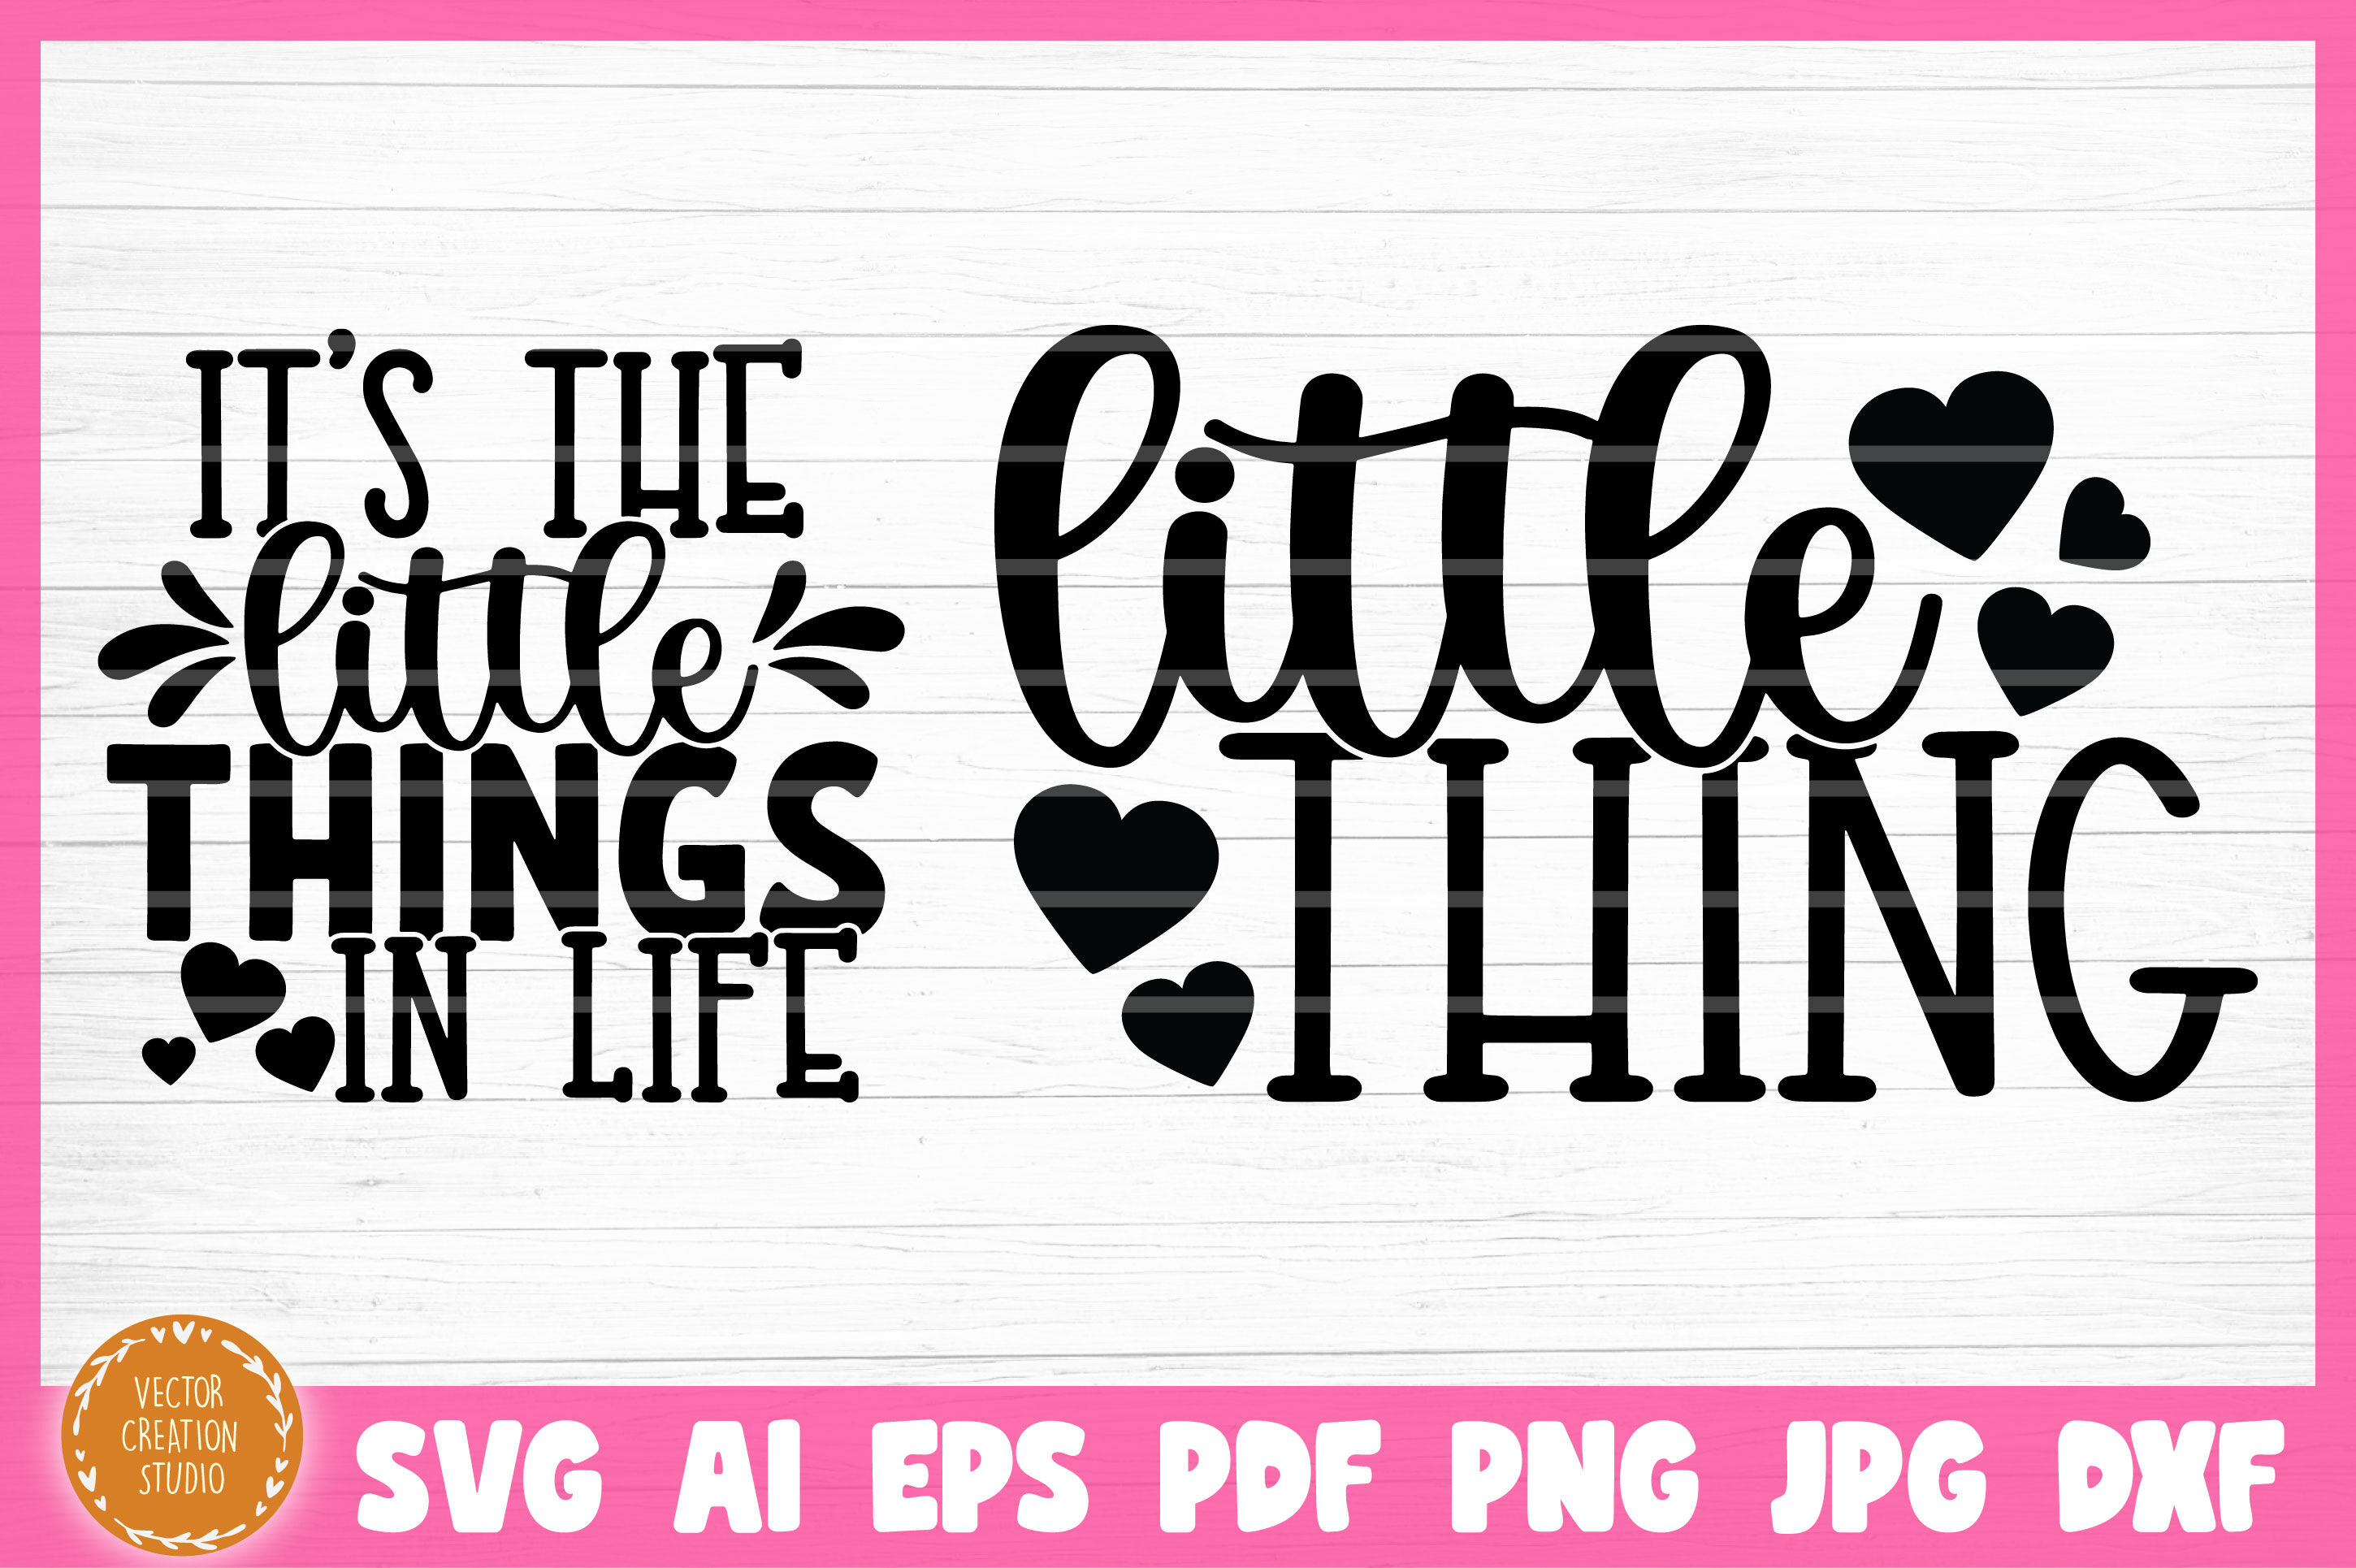 Little Thing Mother Daughter Svg Cut Files By Vectorcreationstudio Thehungryjpeg Com